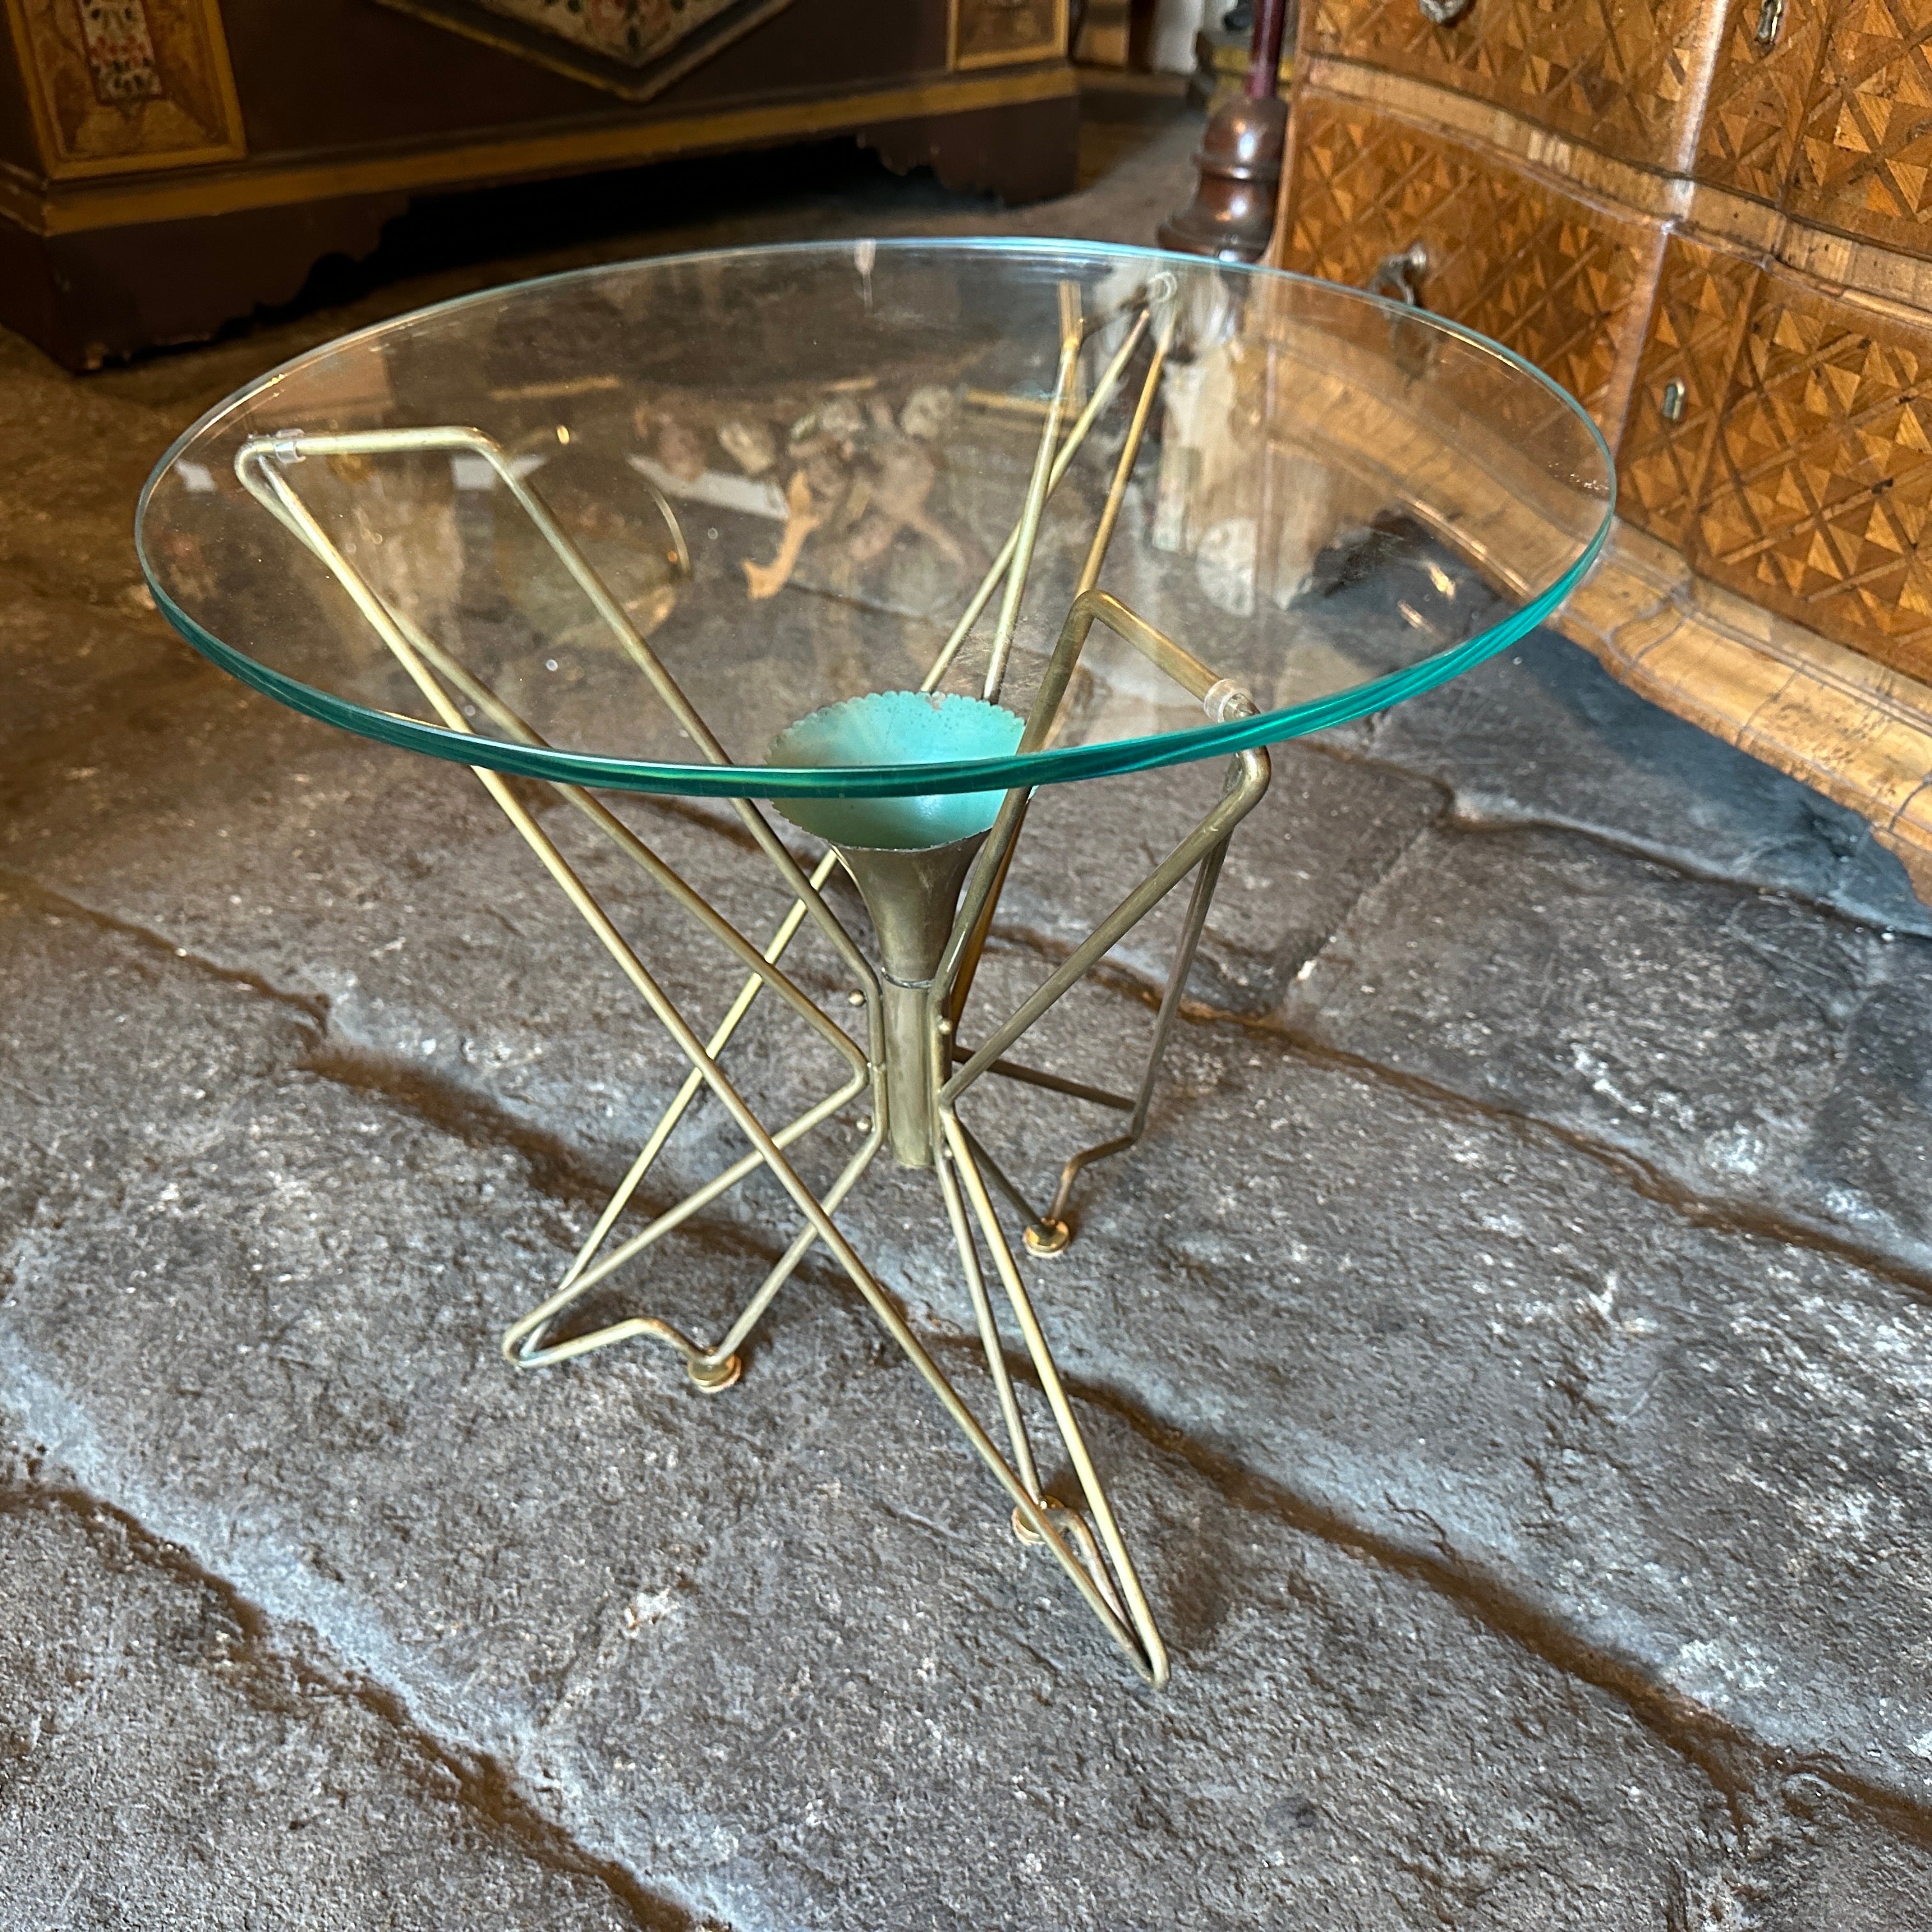 This coffee table designed and manufactured in Italy in the Fifties exhibits several characteristic features of Ponti's design aesthetic and mid-century modern design principles. Gio Ponti was an influential Italian architect, industrial designer,